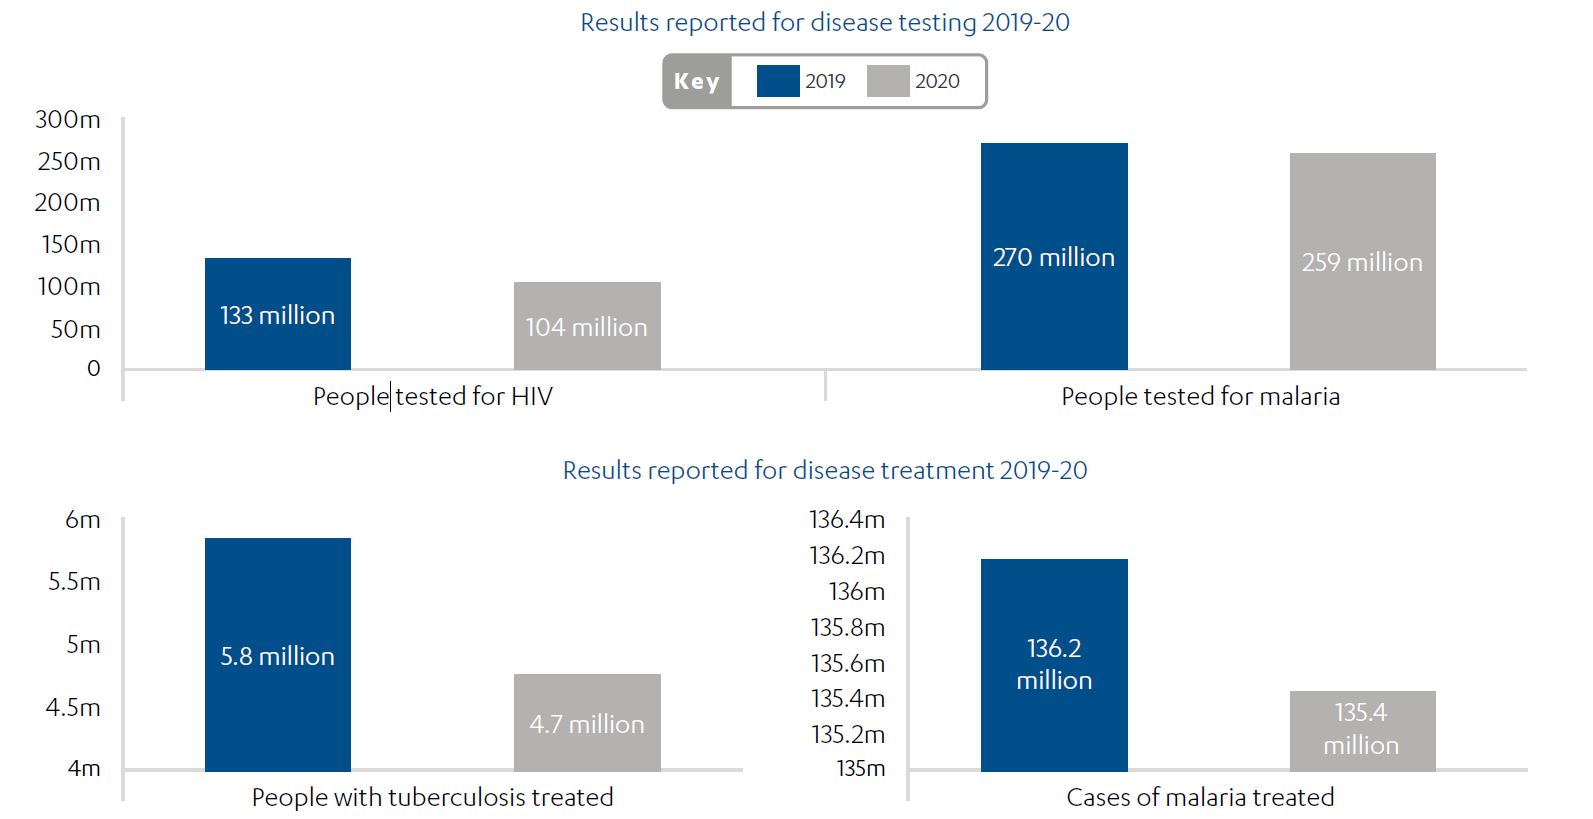 Bar charts showing results reported for disease testing 2019-20 and results reported for disease treatment 2019-20